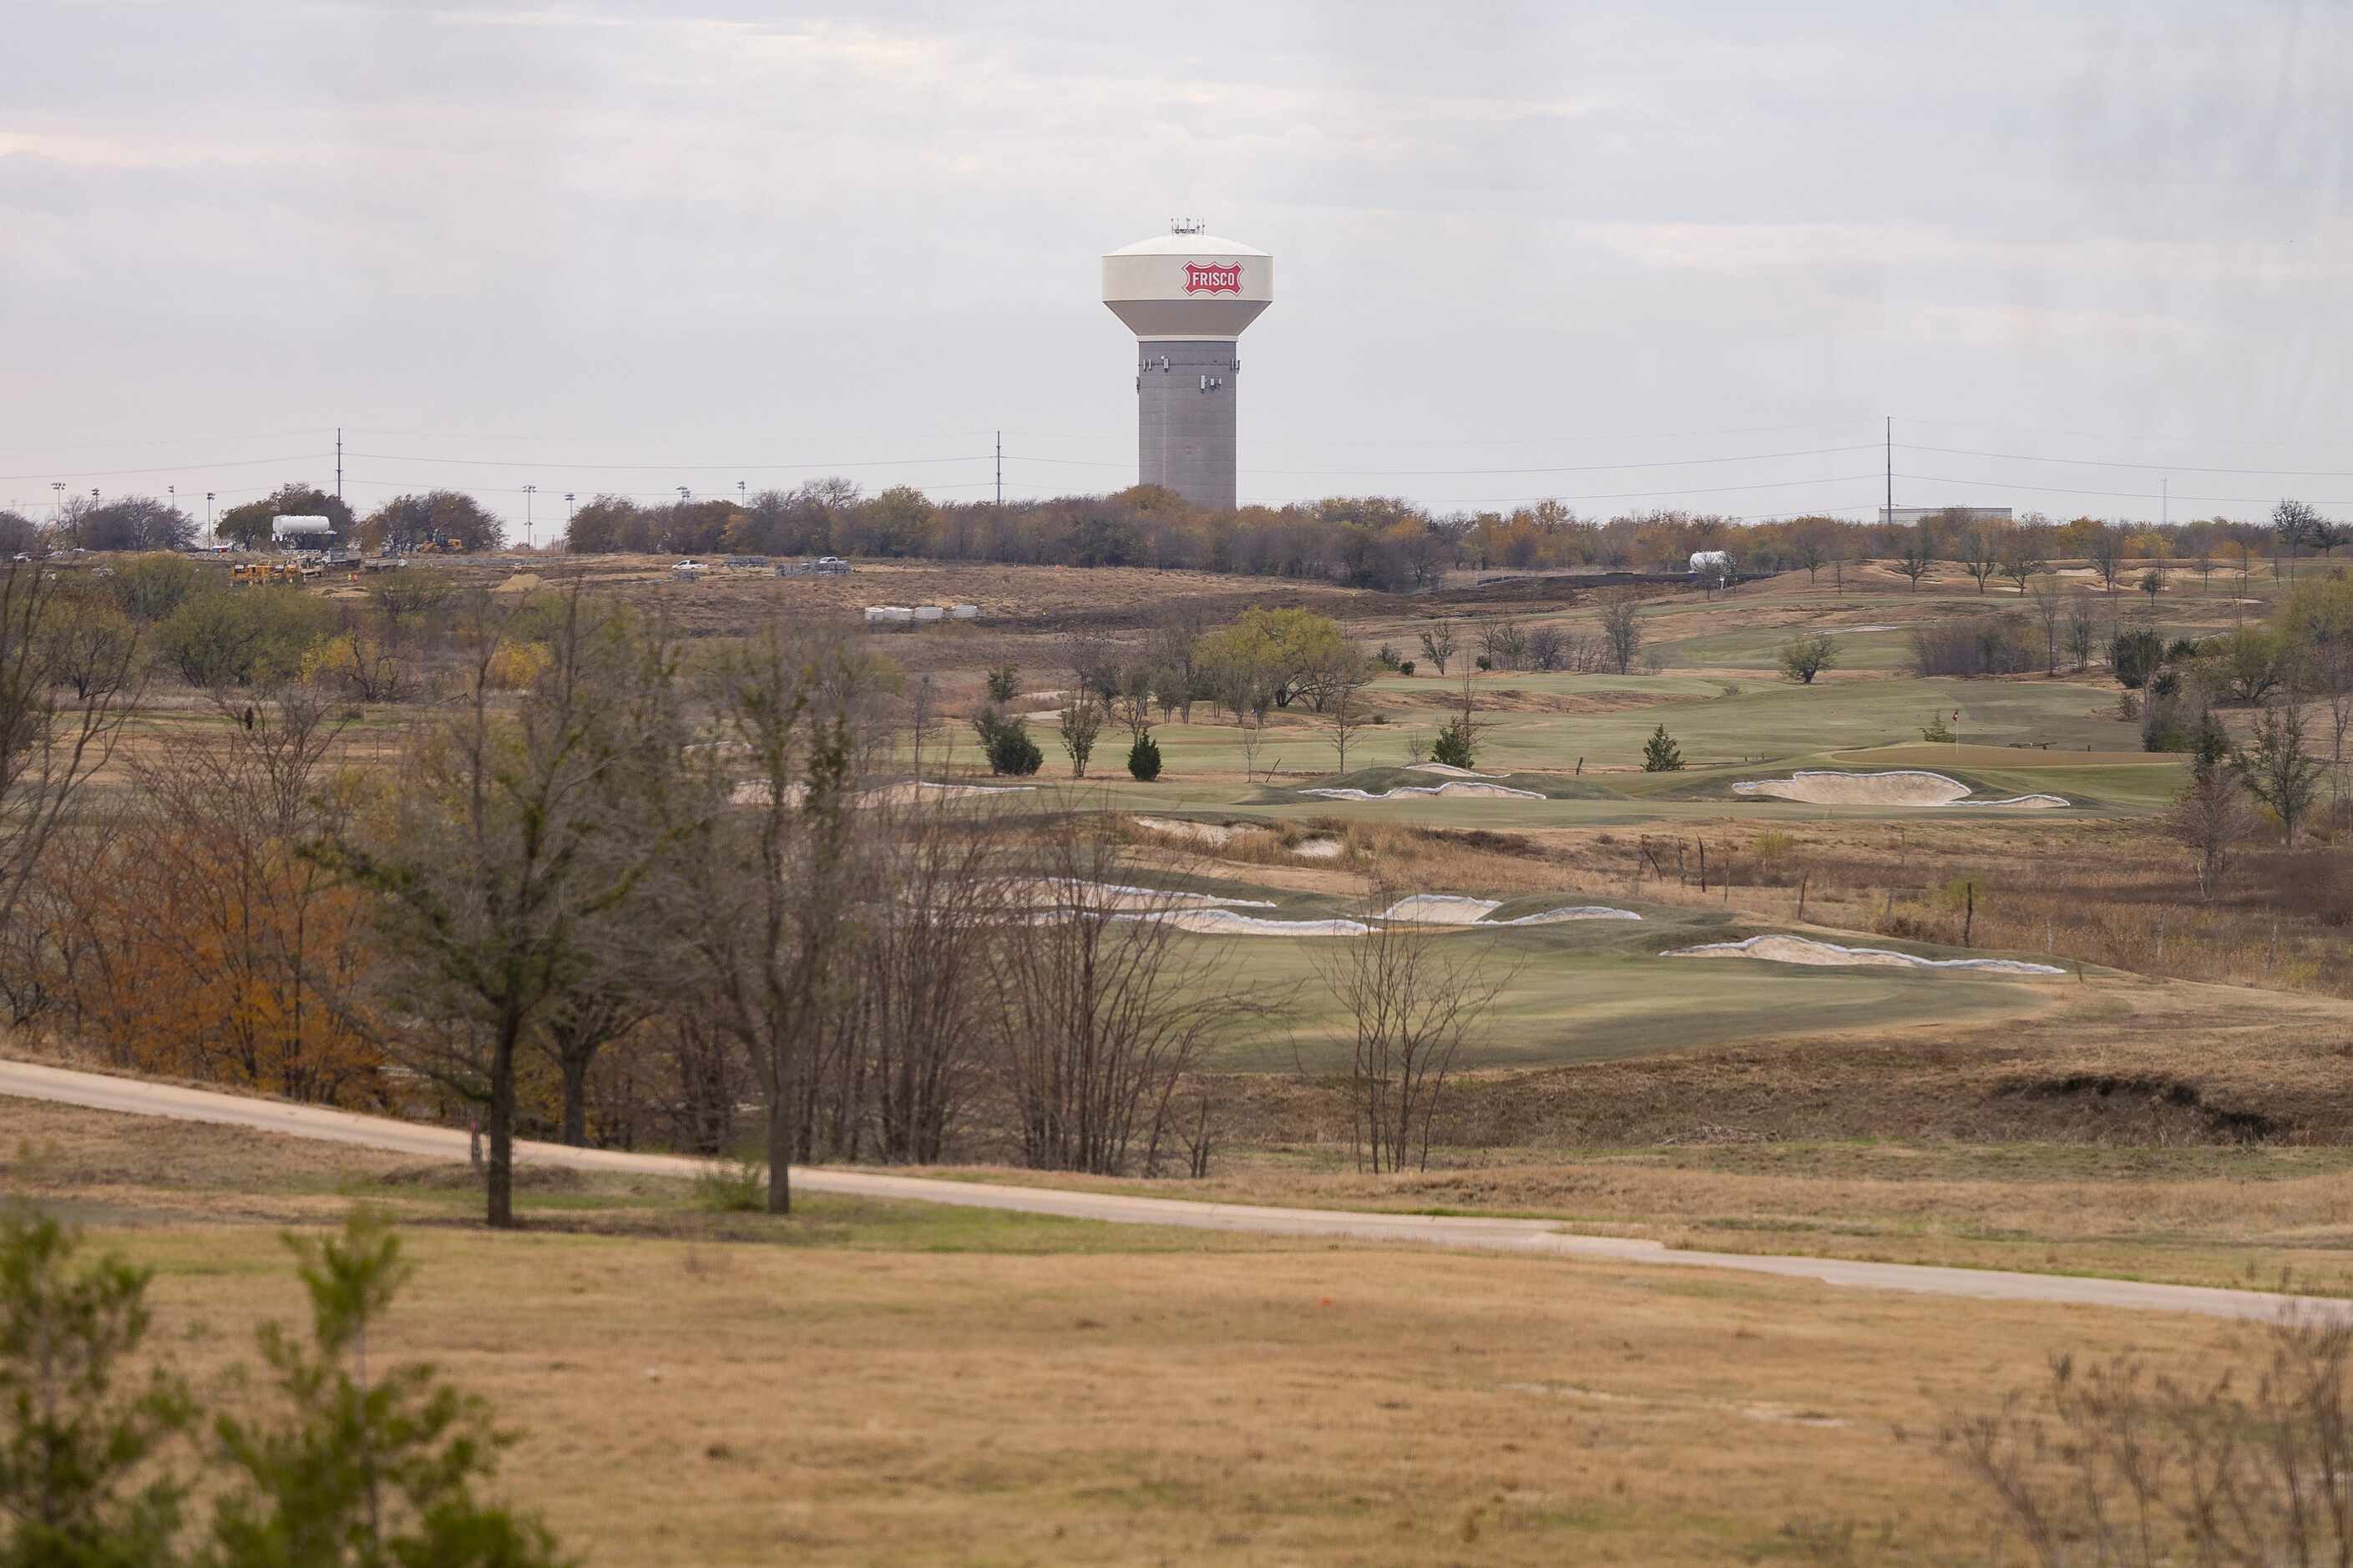 Frisco's distinctive water tower is seen in the distance from the resort's golf course.